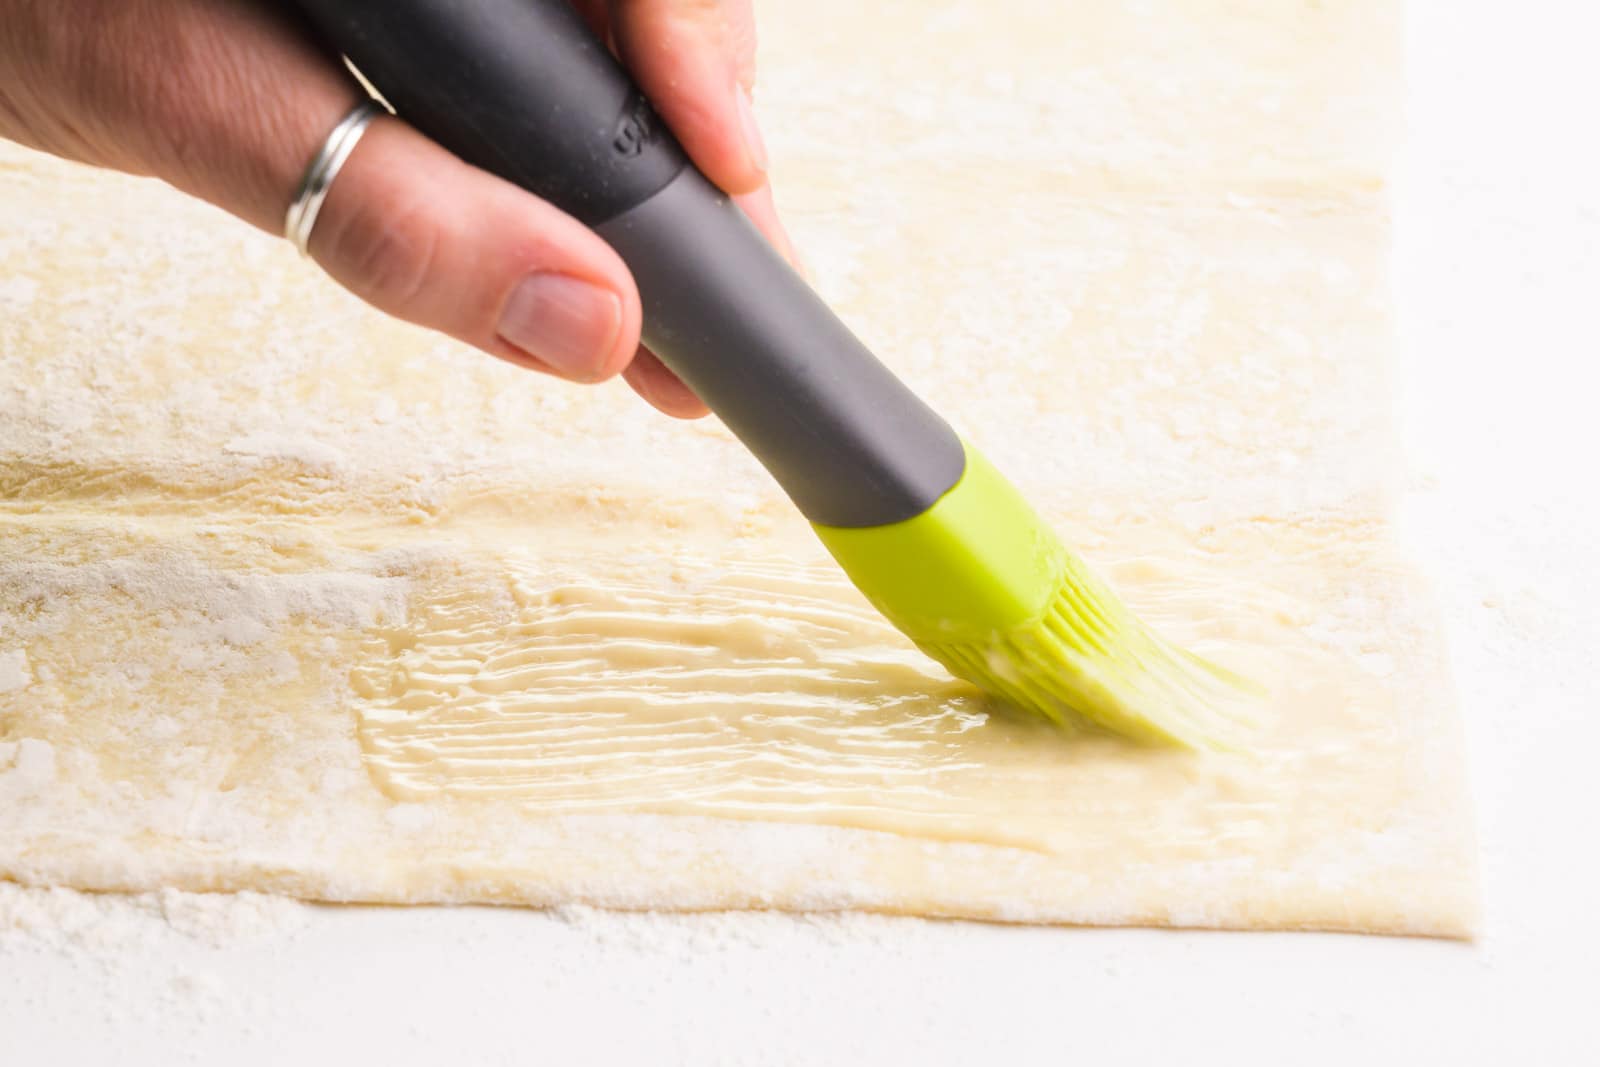 A. hand holds a pastry brush, spreading melted butter over a pastry sheet.